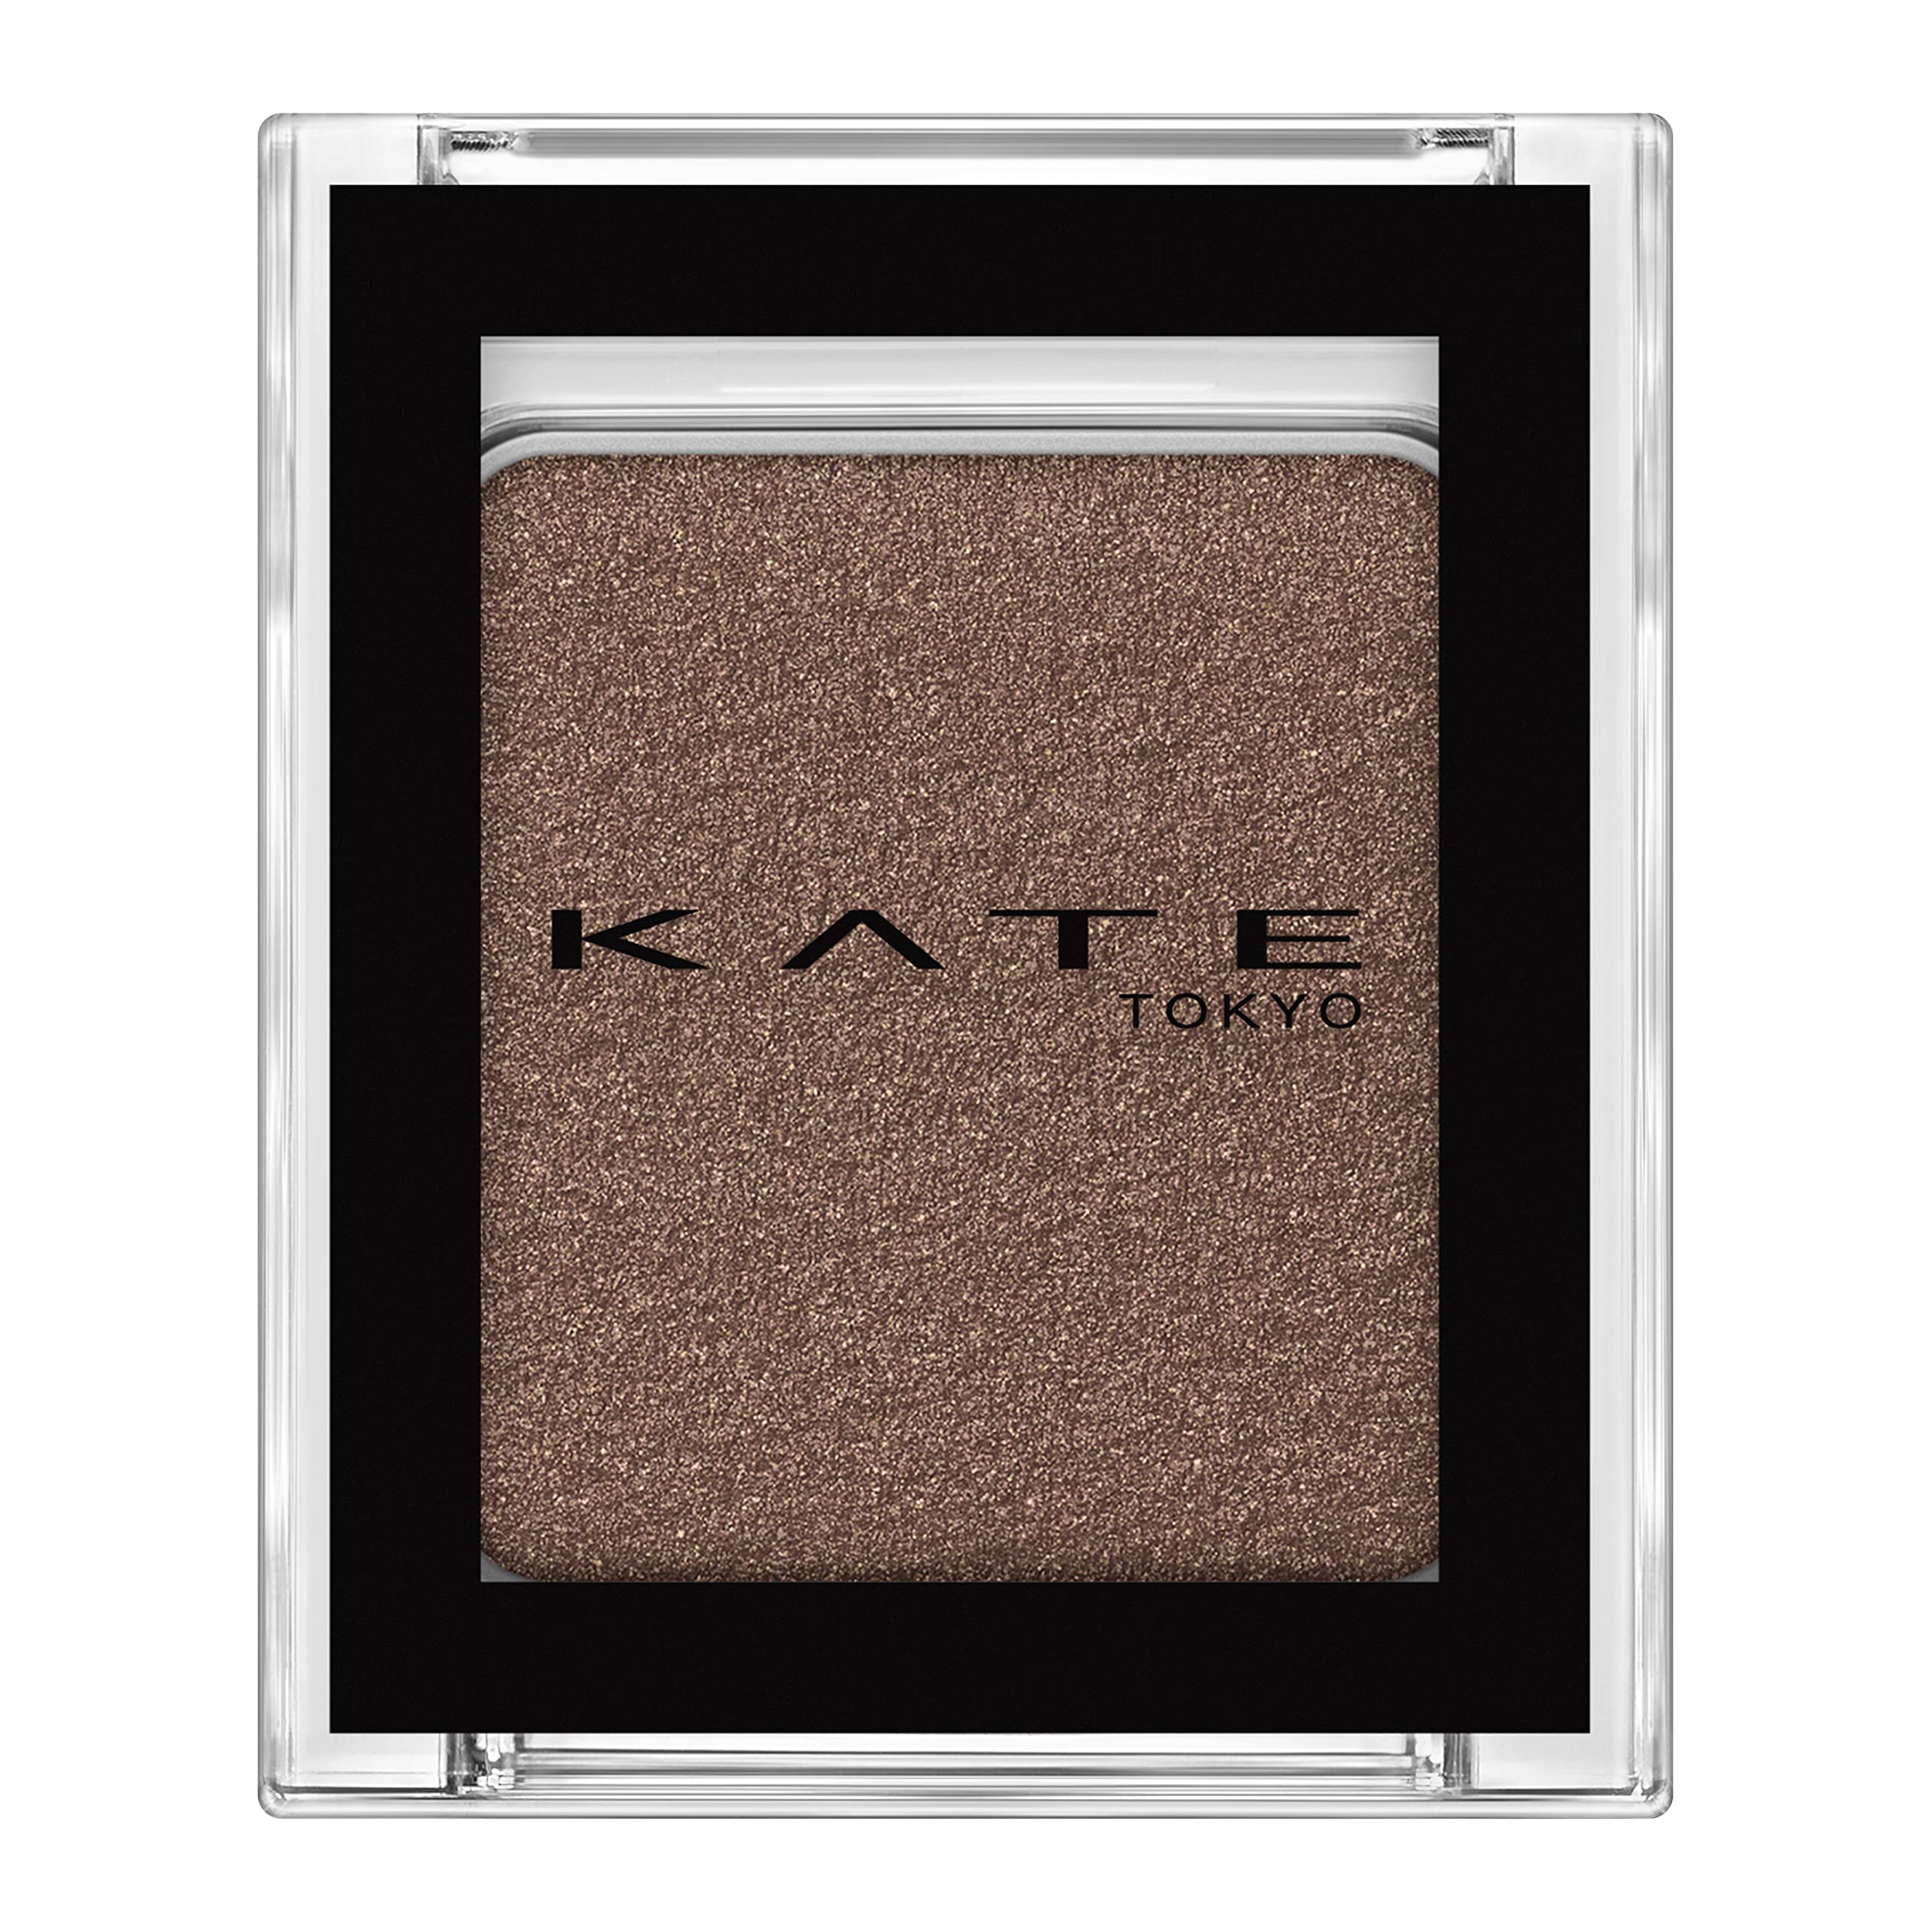 Kate Z Gy-1 Eyebrow Pencil - Enhance Brows with Expert Precision